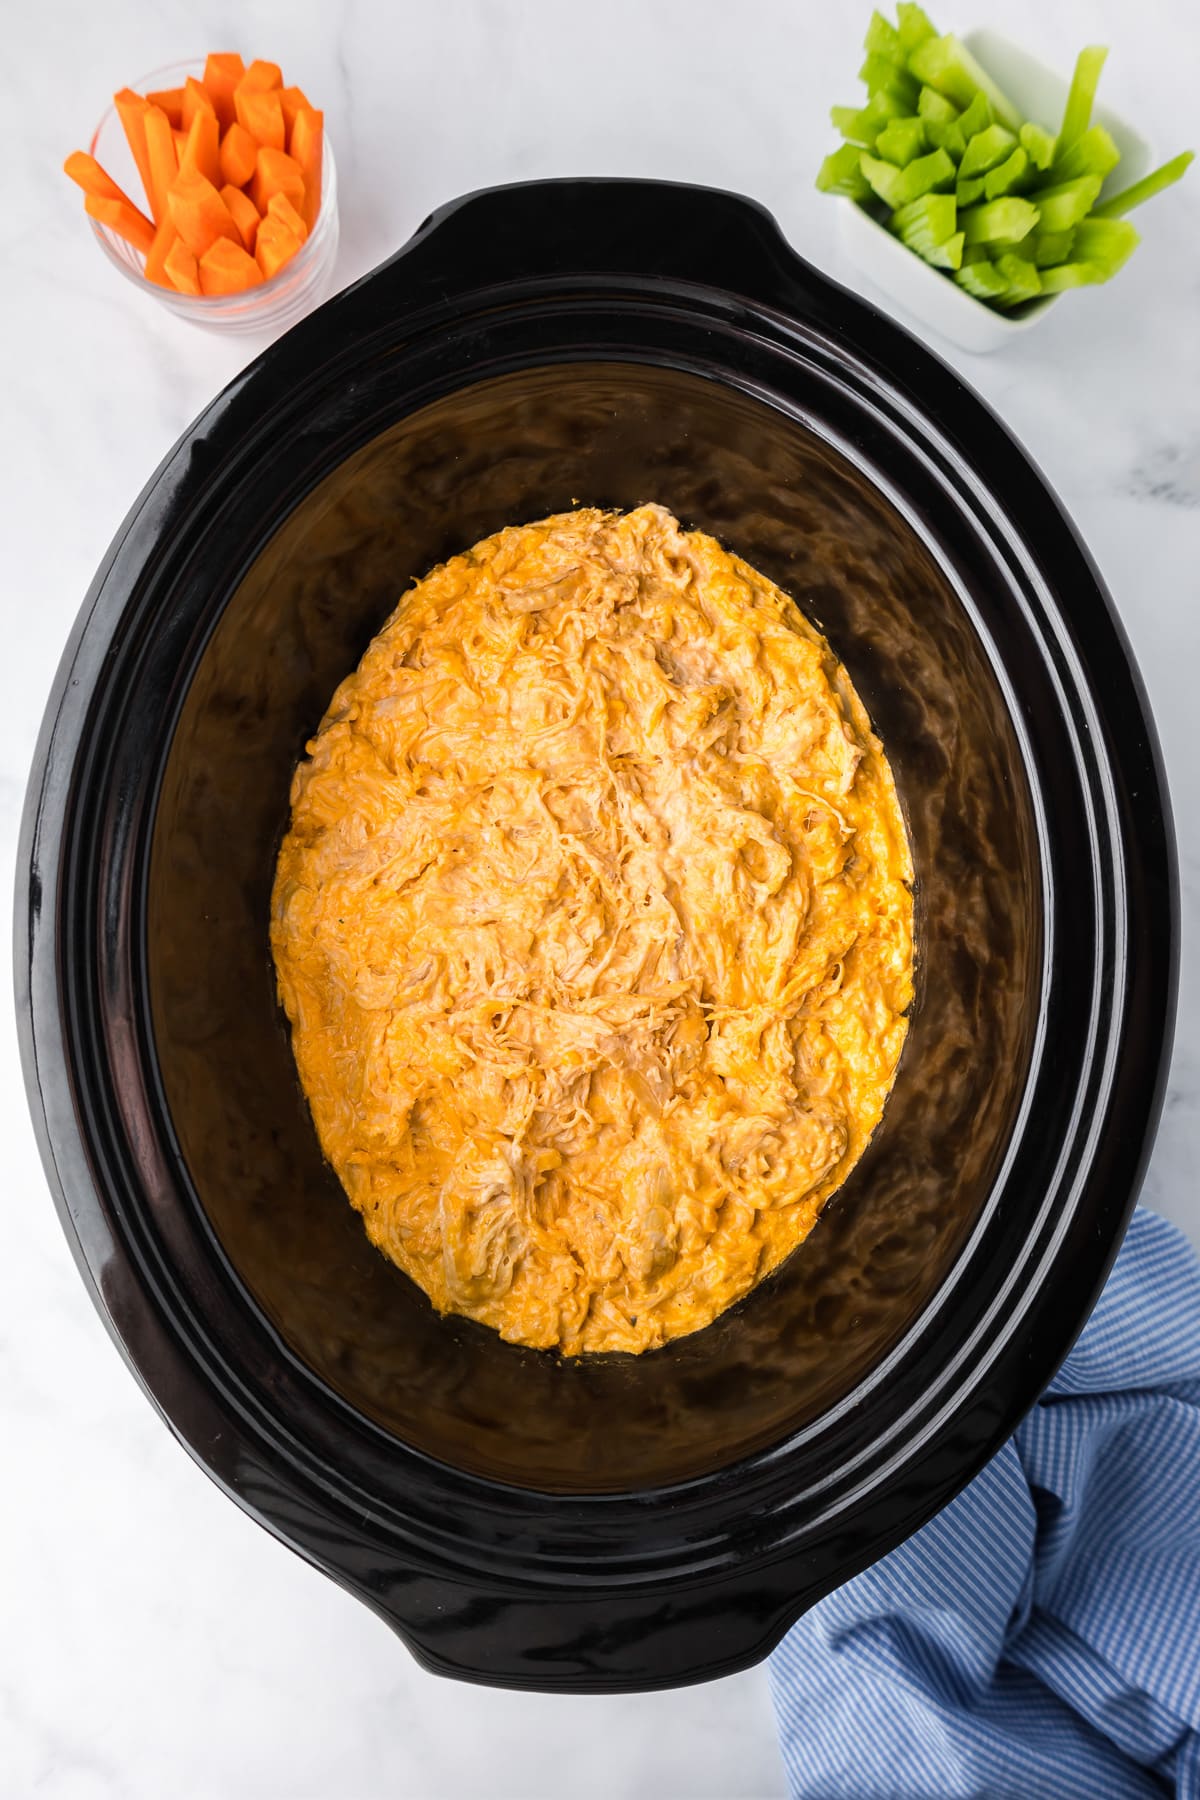 A crock pot filled with buffalo chicken dip with small cups of carrot and celery sticks nearby.